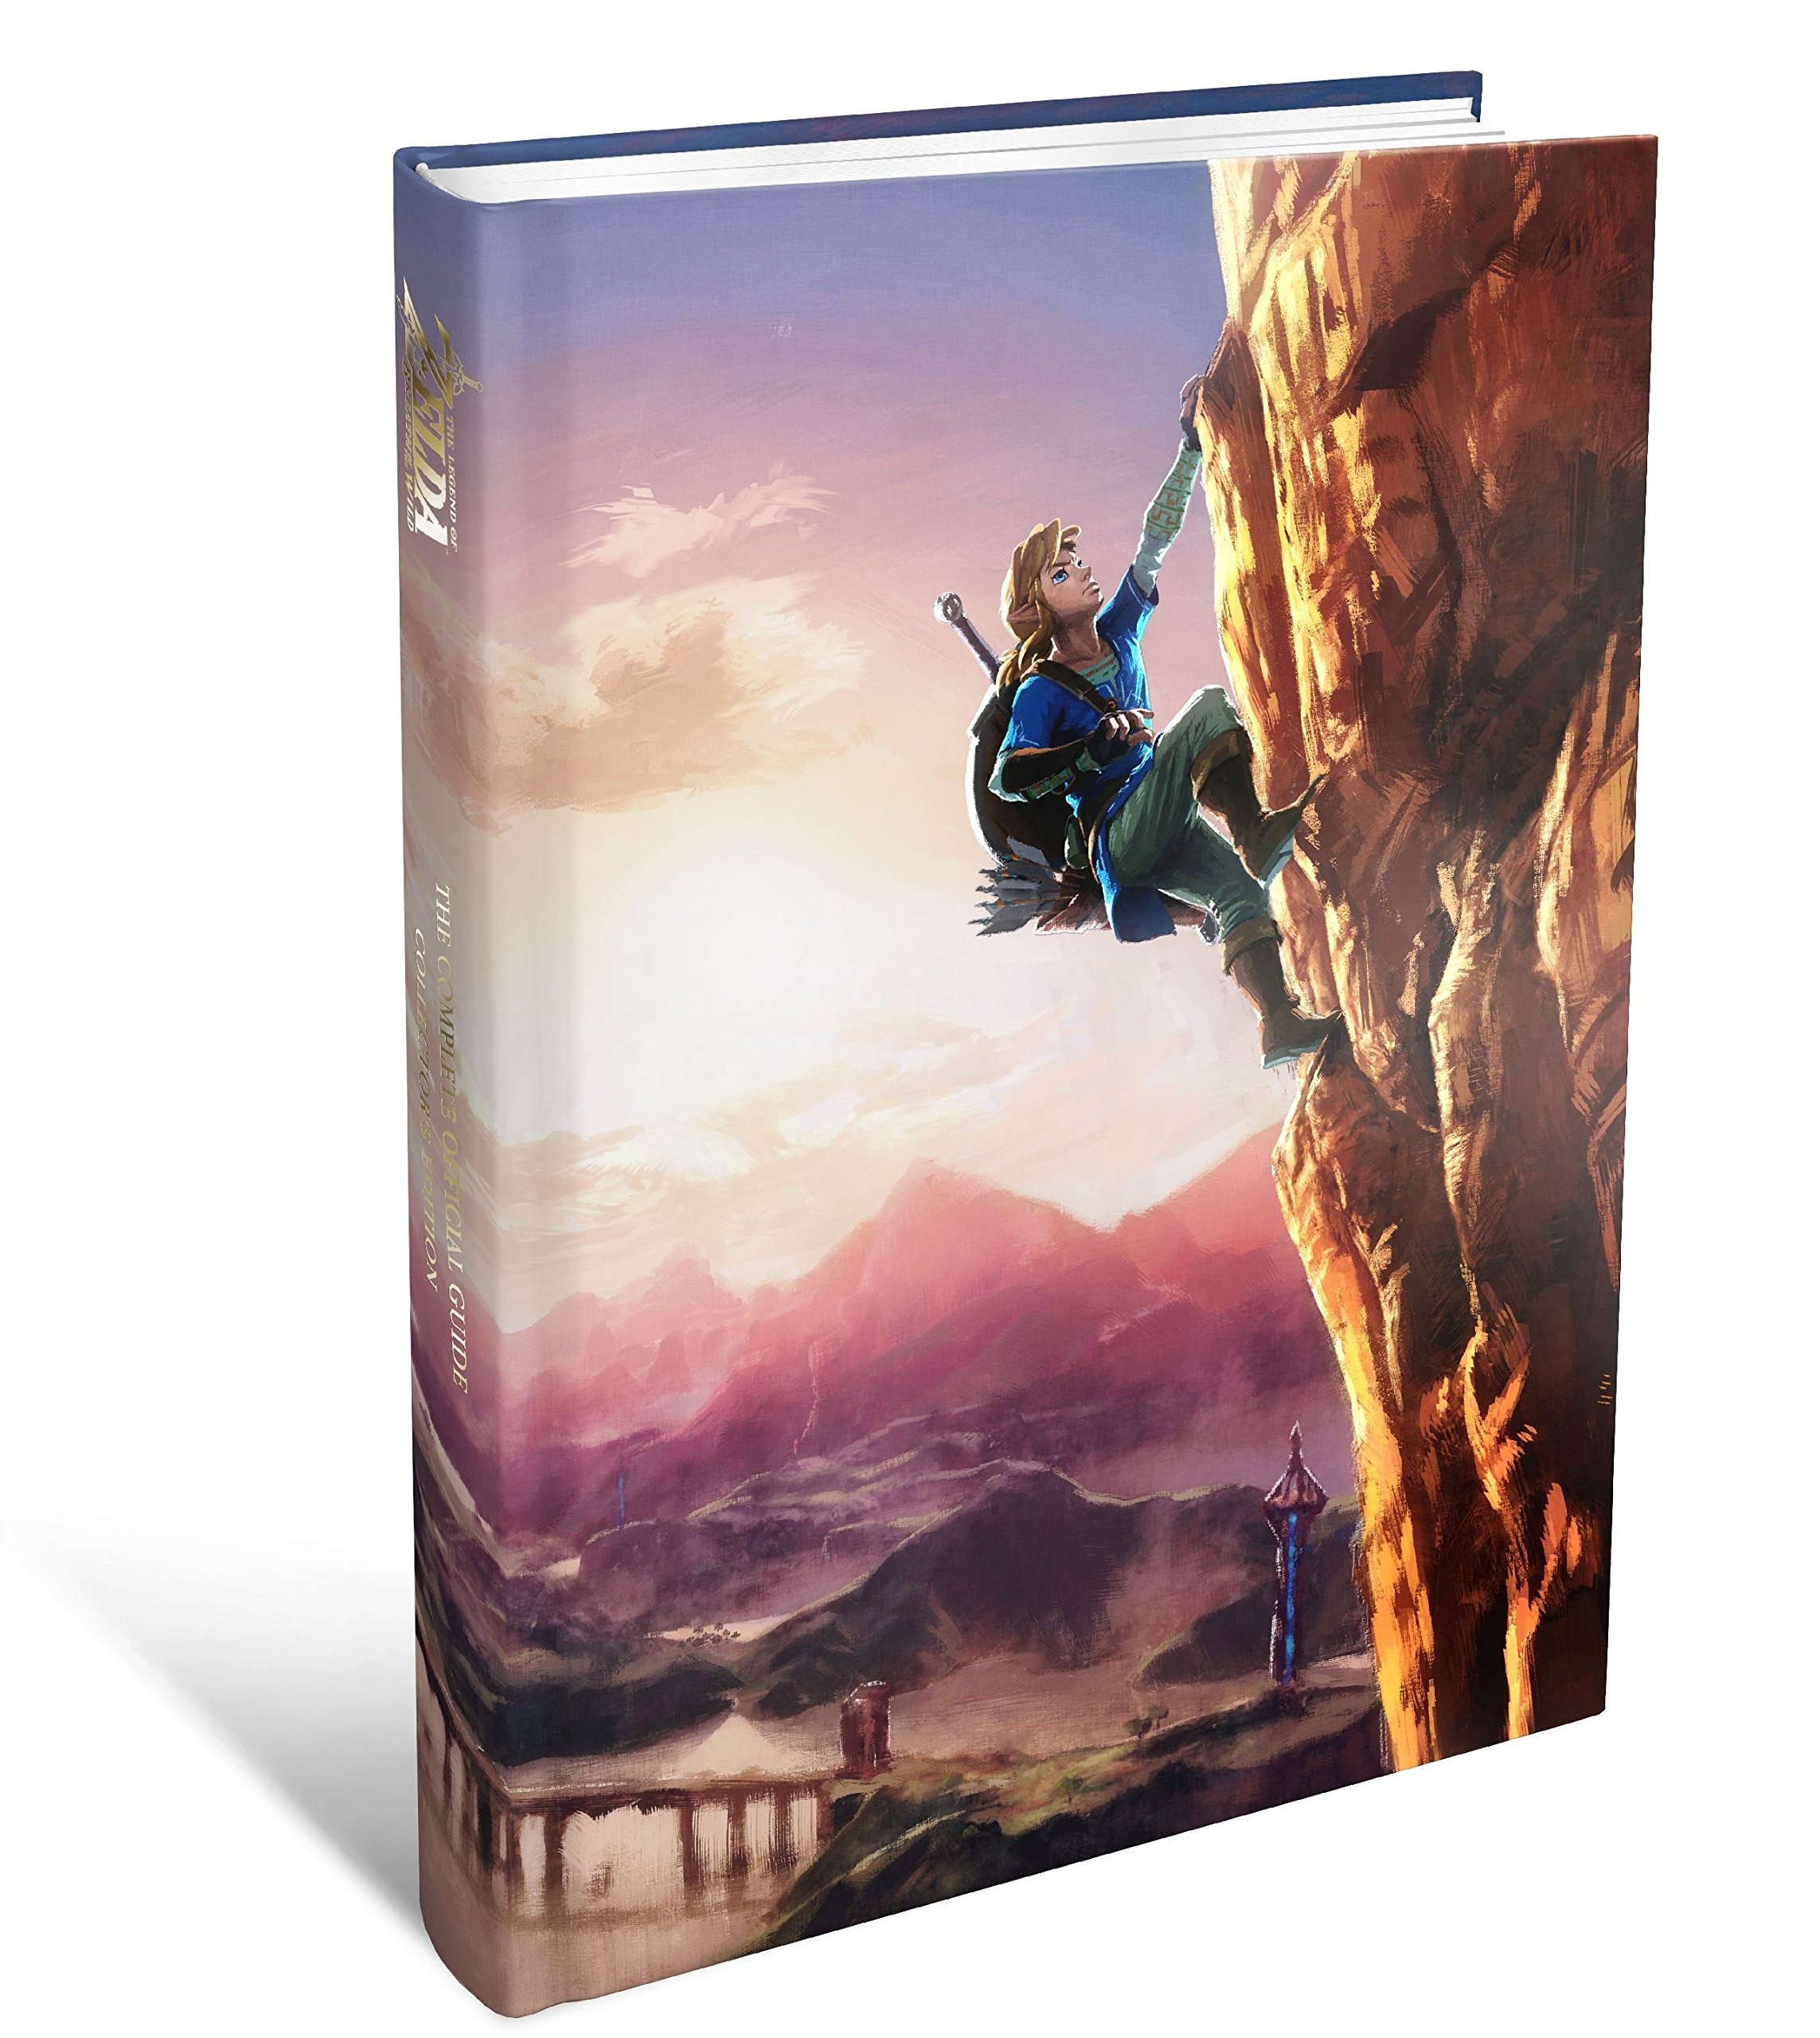 The Legend of Zelda Breath of the Wild The Complete